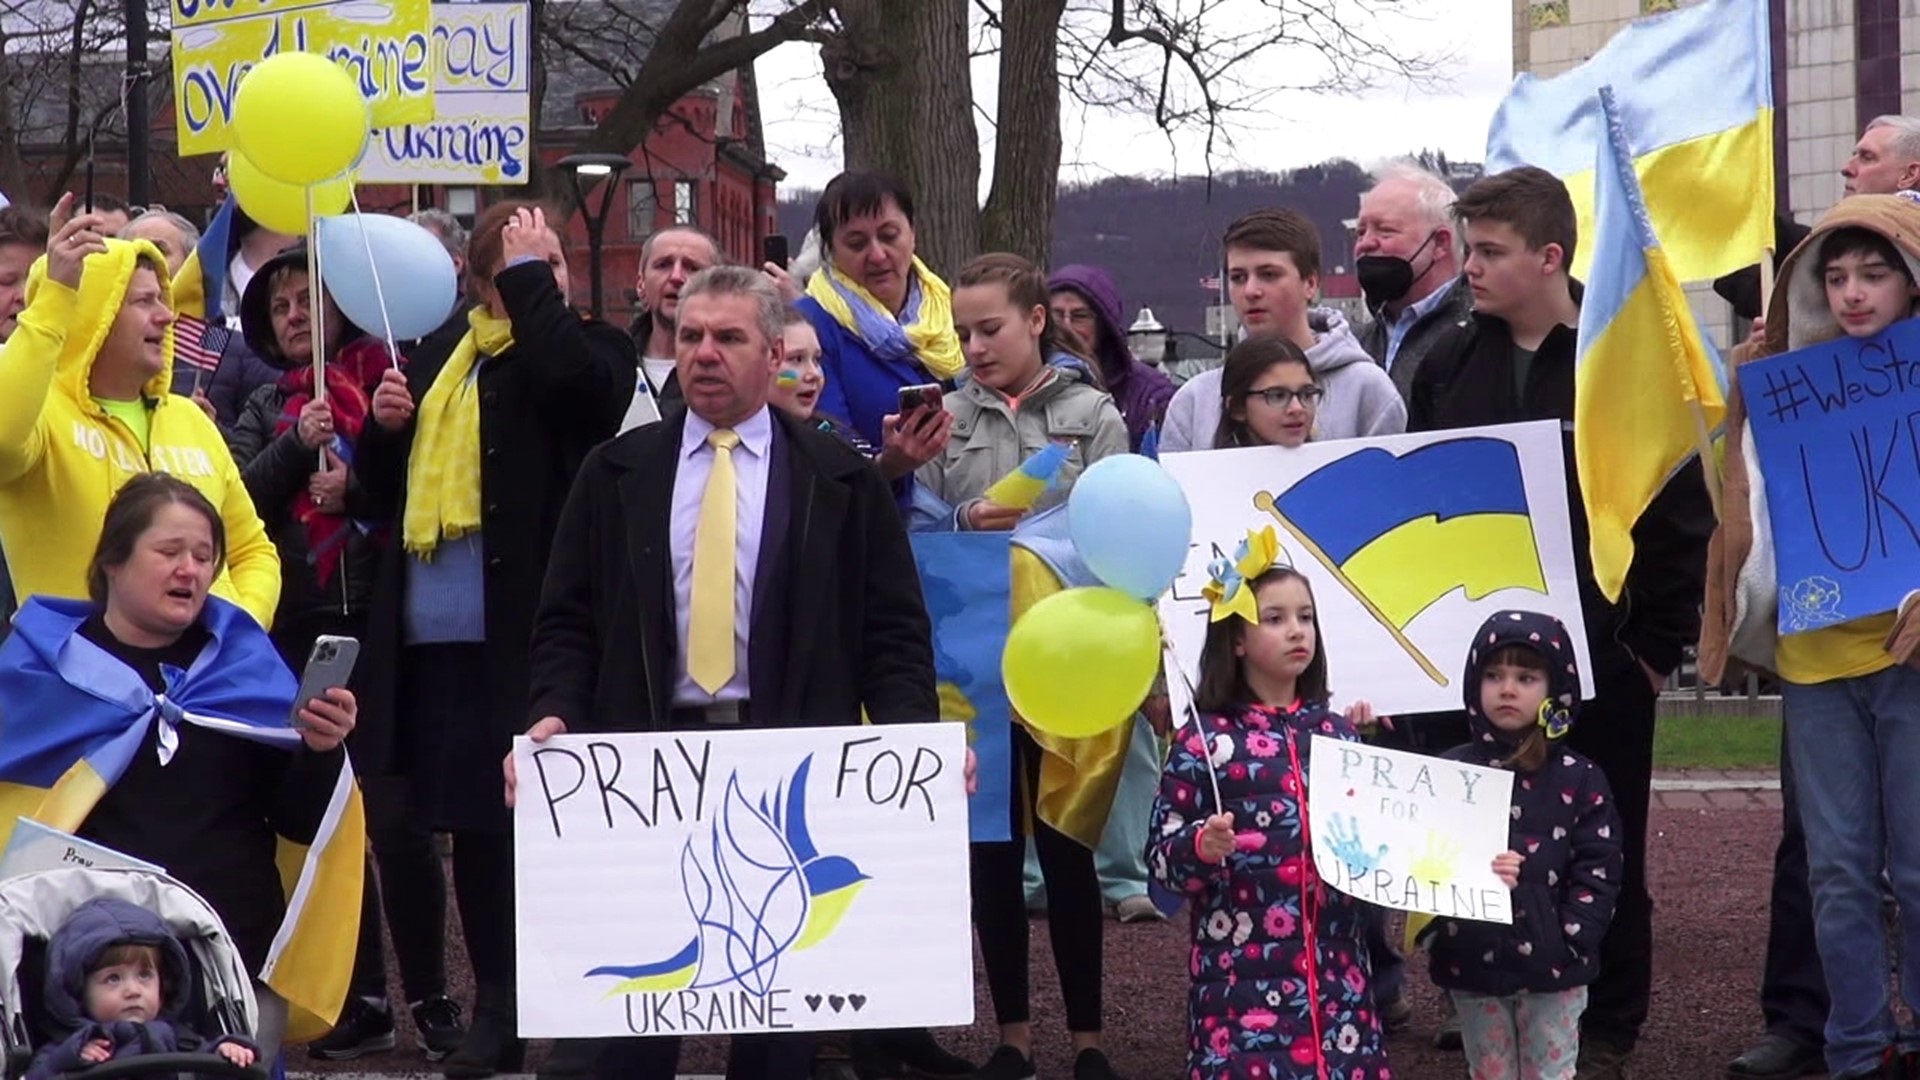 Nearly one hundred people came out to show support for Ukraine Sunday afternoon in Wilkes-Barre. The gesture of solidarity meant a lot to Ukrainians in the area.